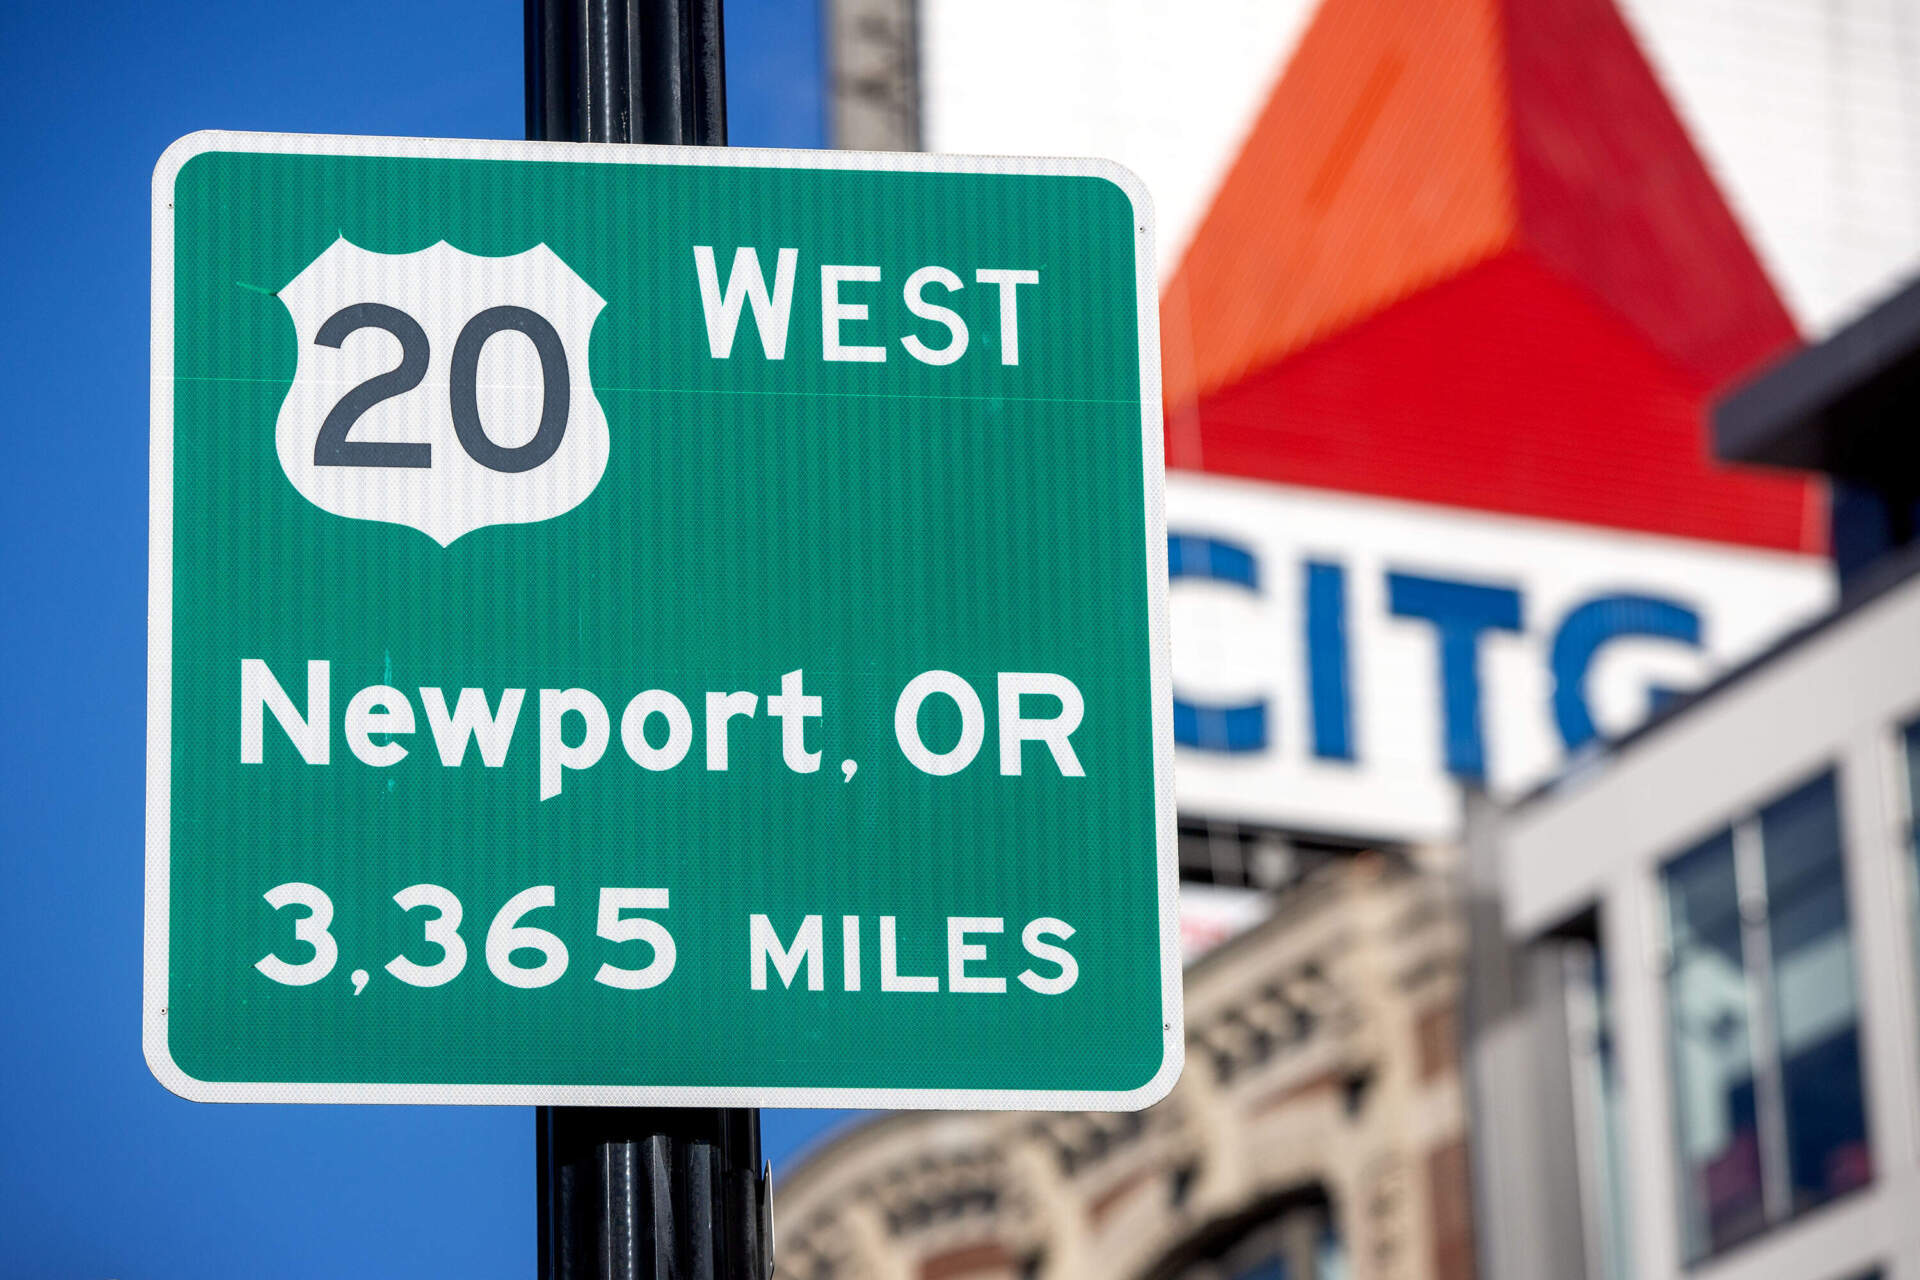 A sign in Boston's Kenmore Square reminds visitors that they can follow Route 20 west for 3,365 miles, all the way to Newport, Oregon. (Robin Lubbock/WBUR)